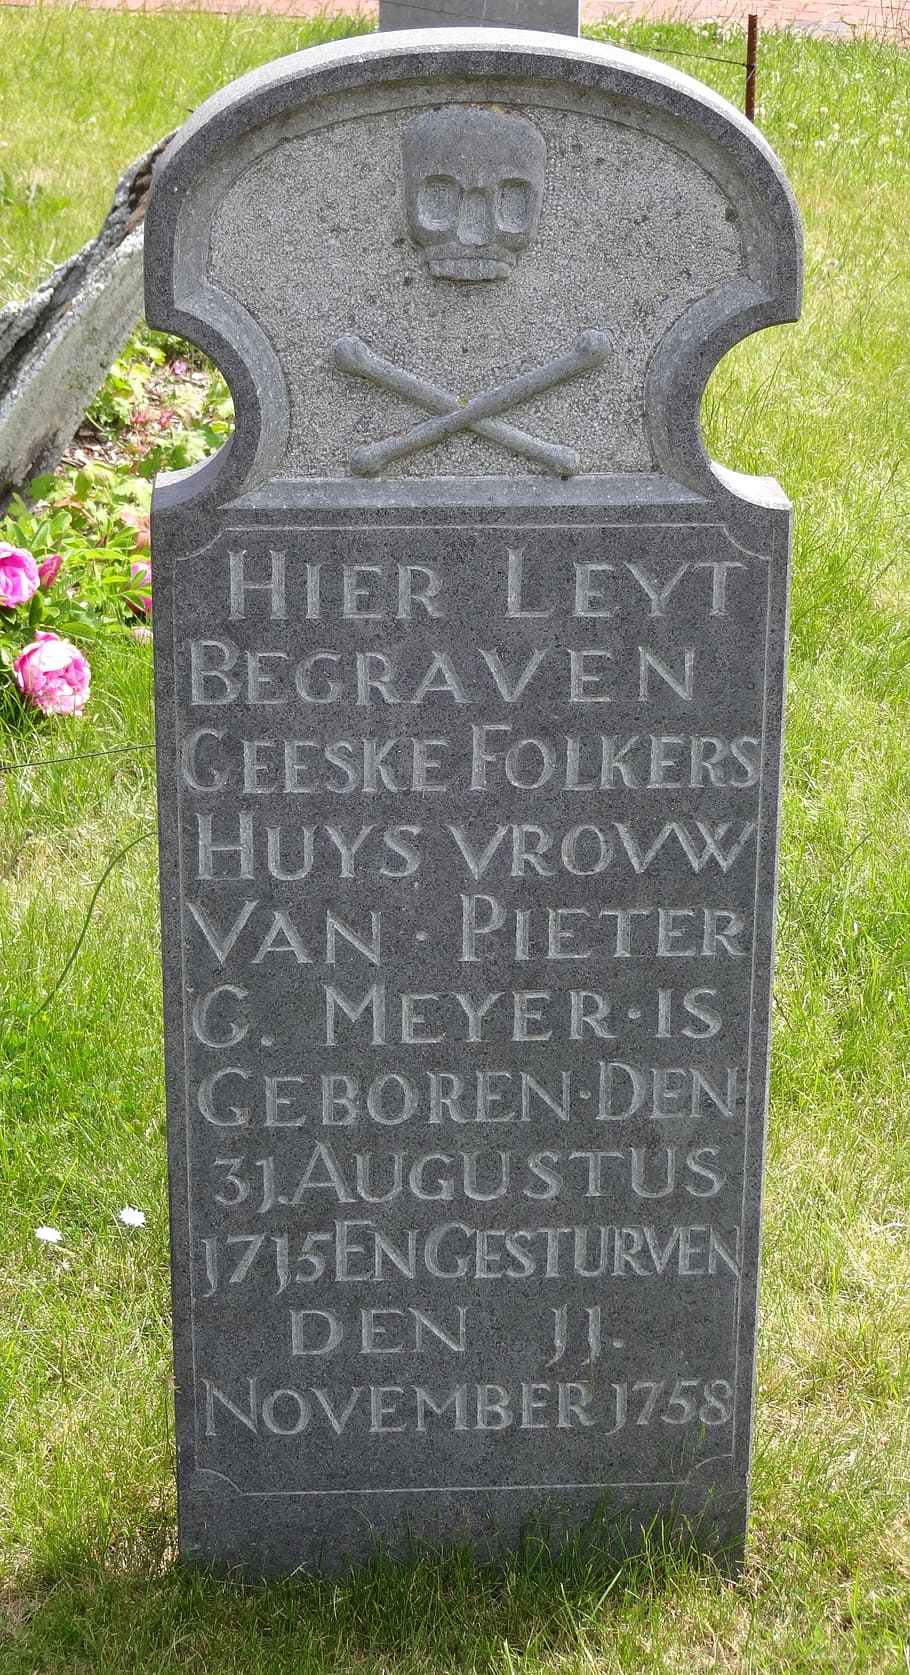 Tombstone, Whalers, Cemetery, final resting place, skull and crossbones, inscription, sign, grave, memorial, grass